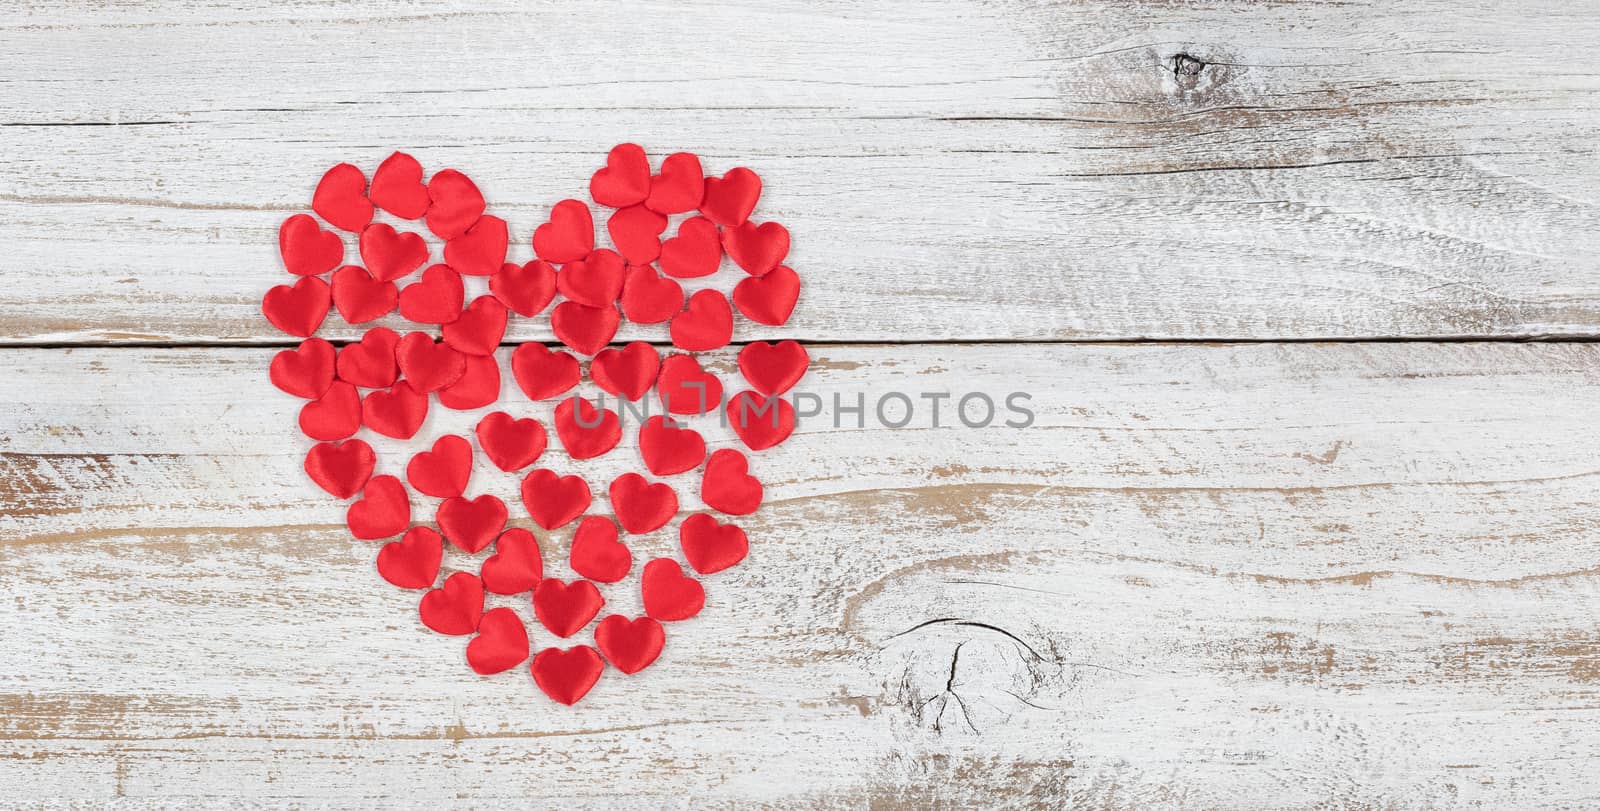 Filled red heart shapes on rustic white wood background by tab1962